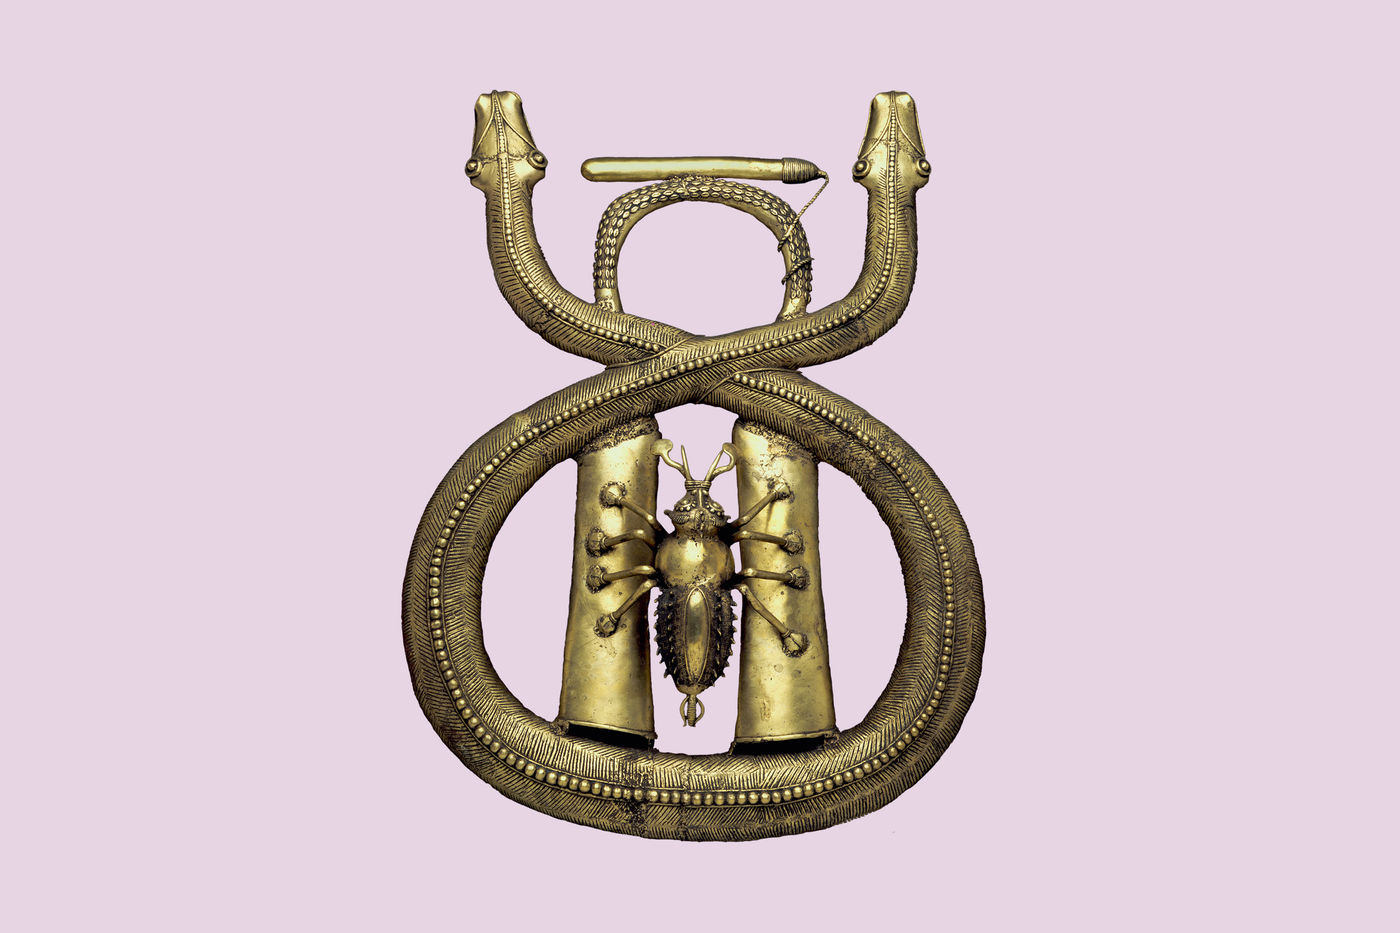 The Bamum (baa-MOOM) have lived for centuries in western Cameroon. The double-headed snake became their royal symbol in the 1800s, a reminder of King Mbuembue’s heroic army that fought enemies on two fronts at the same time—and won.